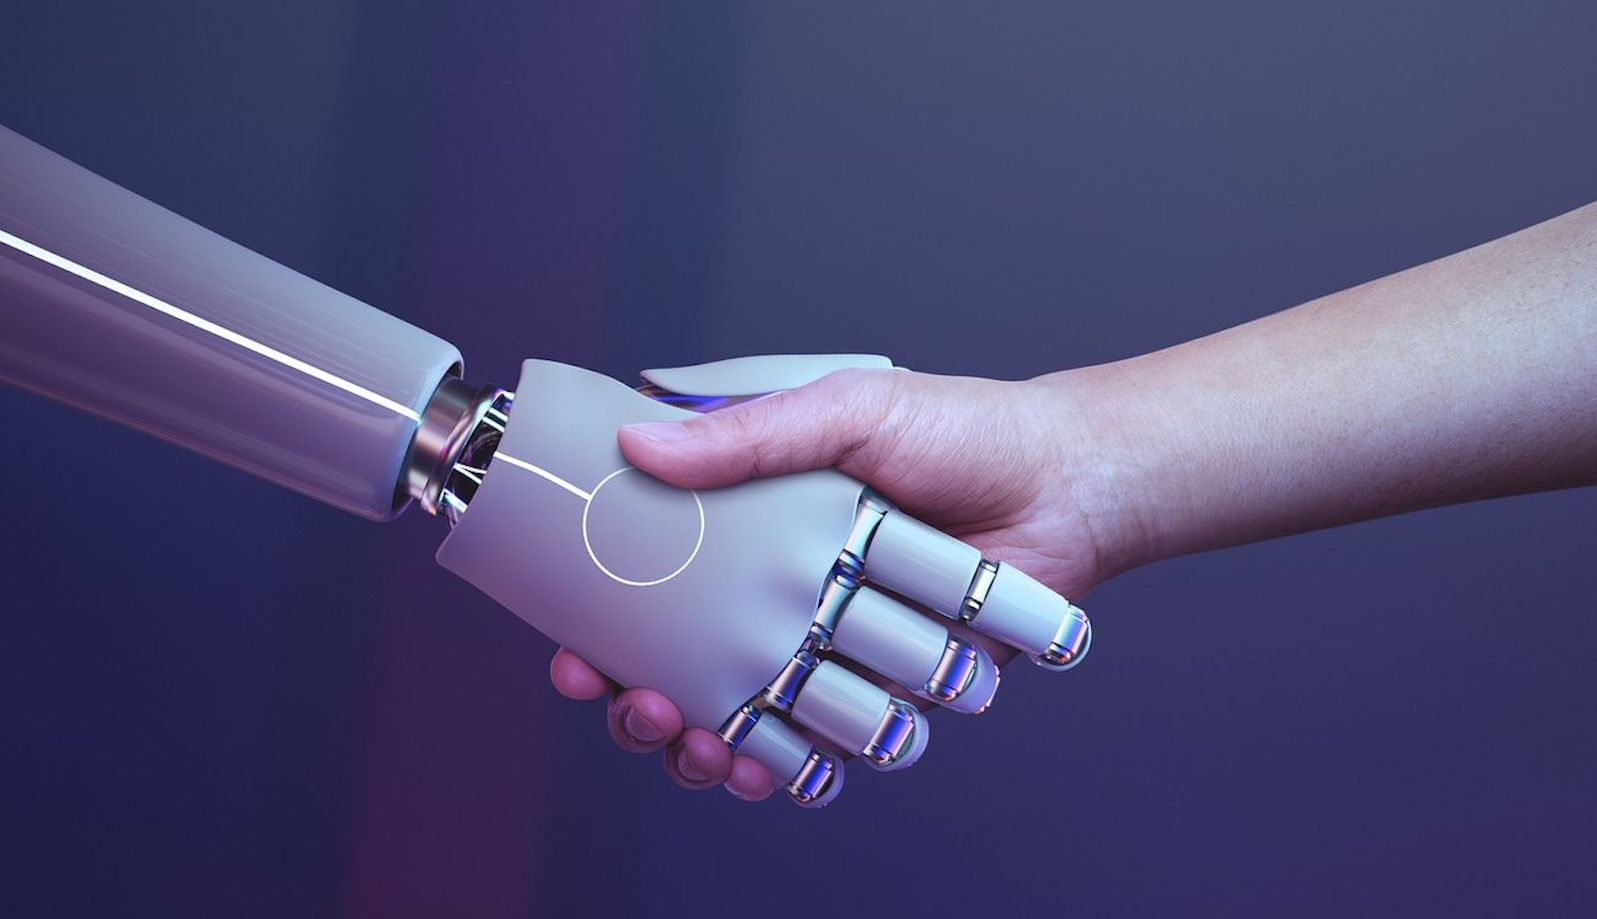 A robotic hand shaking a human hand against a blue/purple background